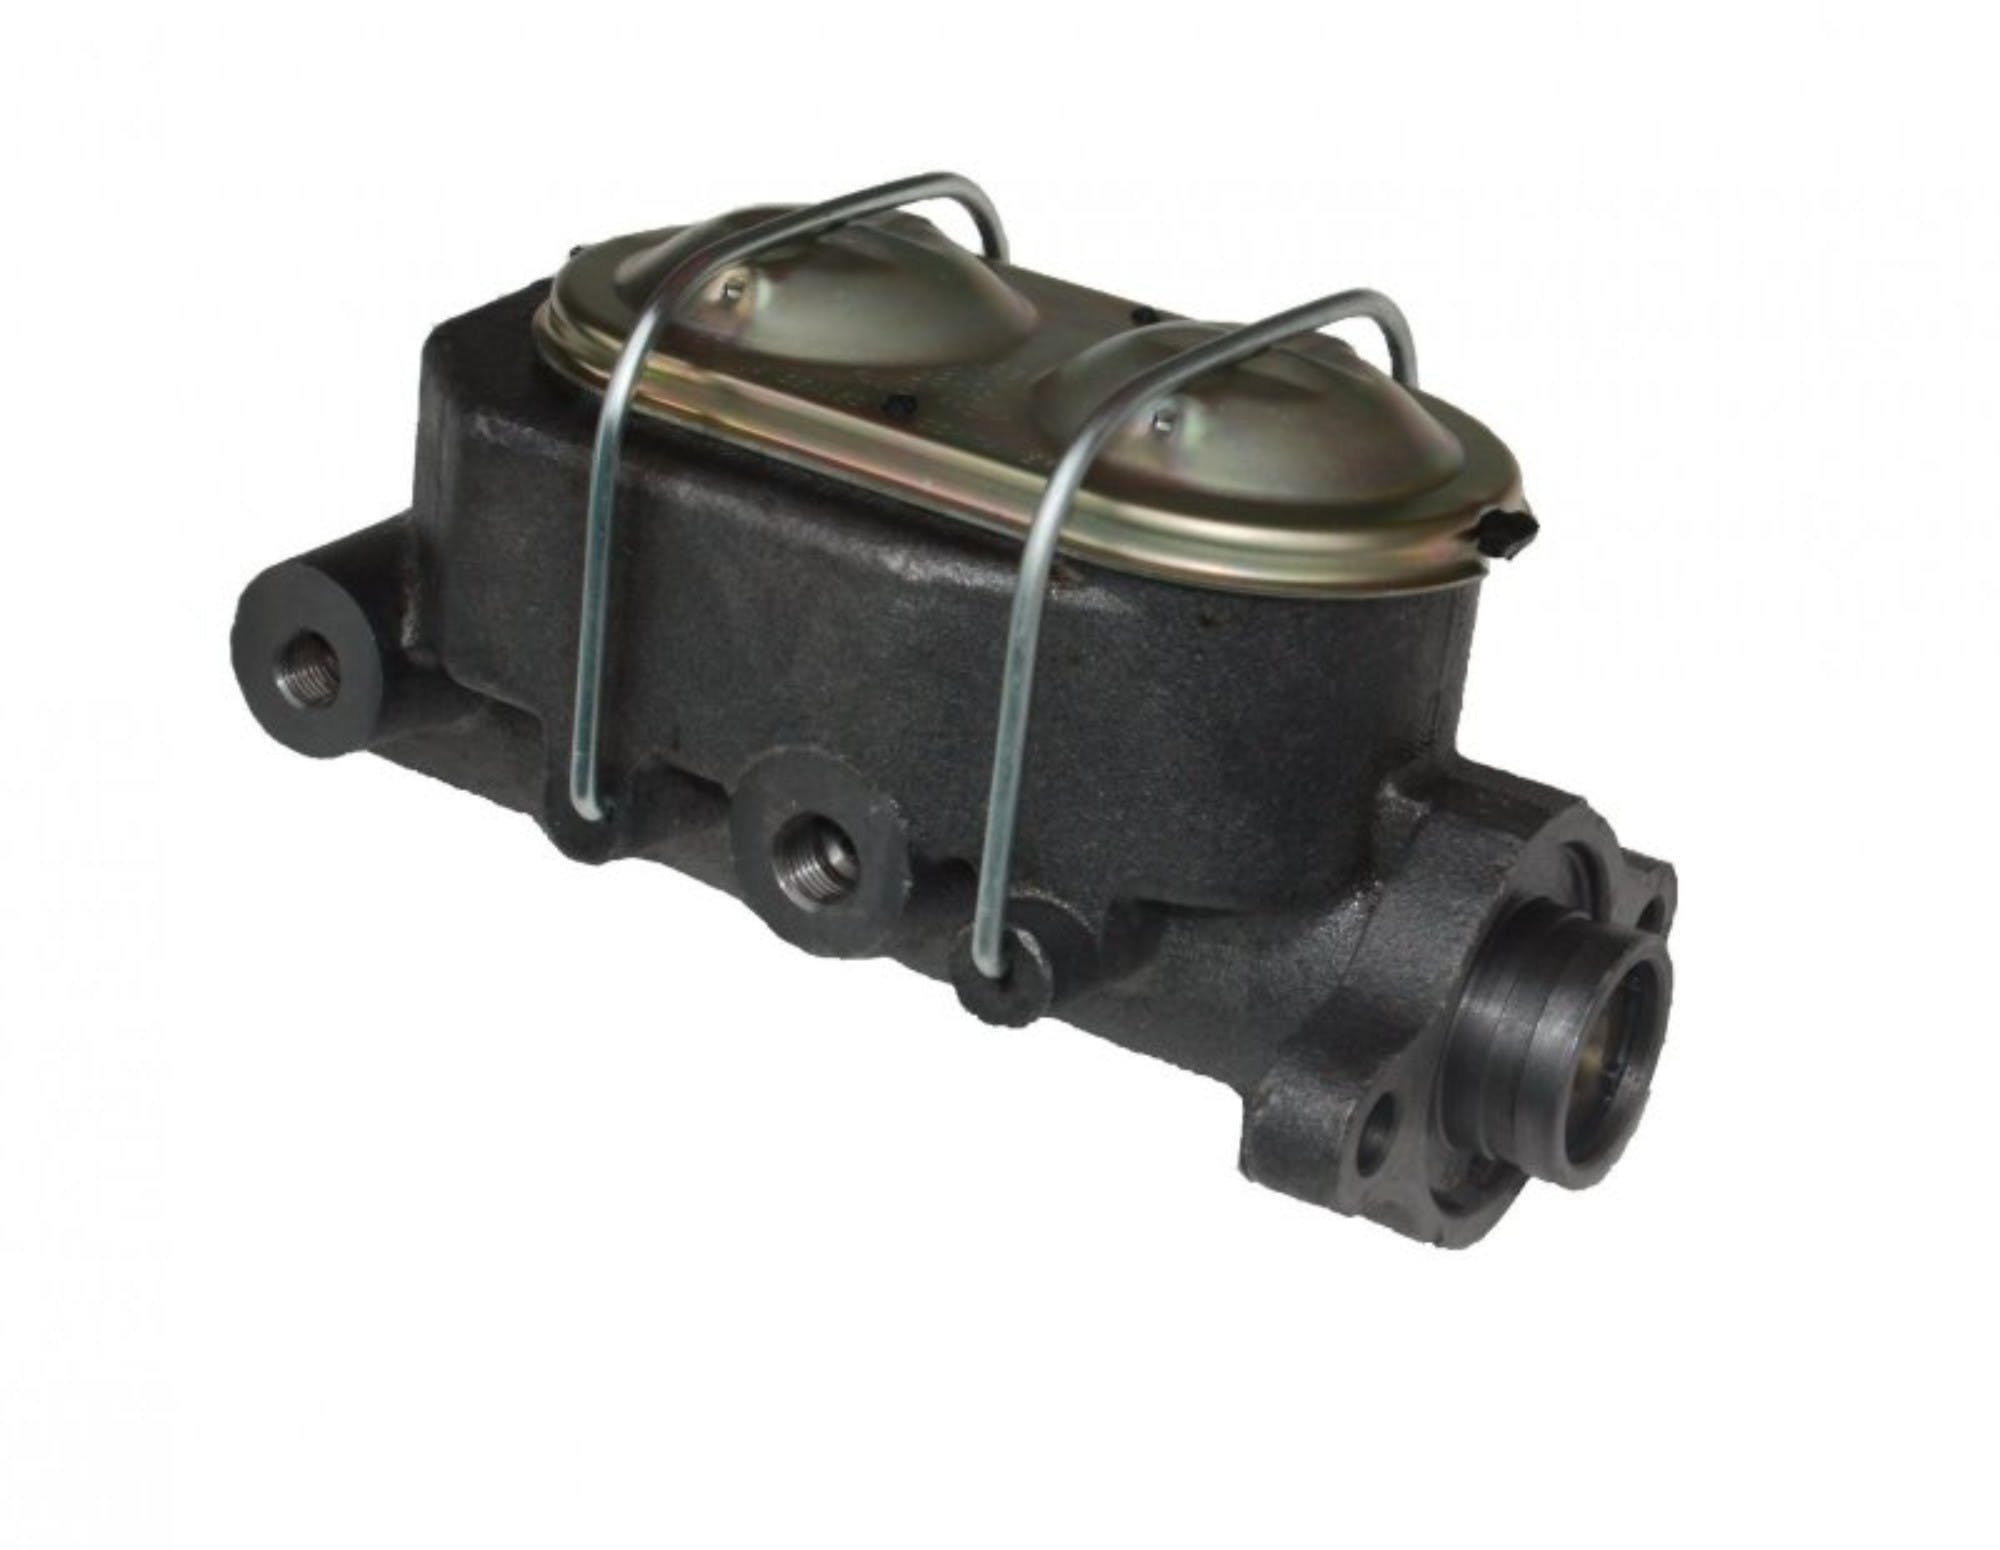 LEED Brakes 3E1 8 in Power Brake Booster 1-1/8in bore Master Cylinder